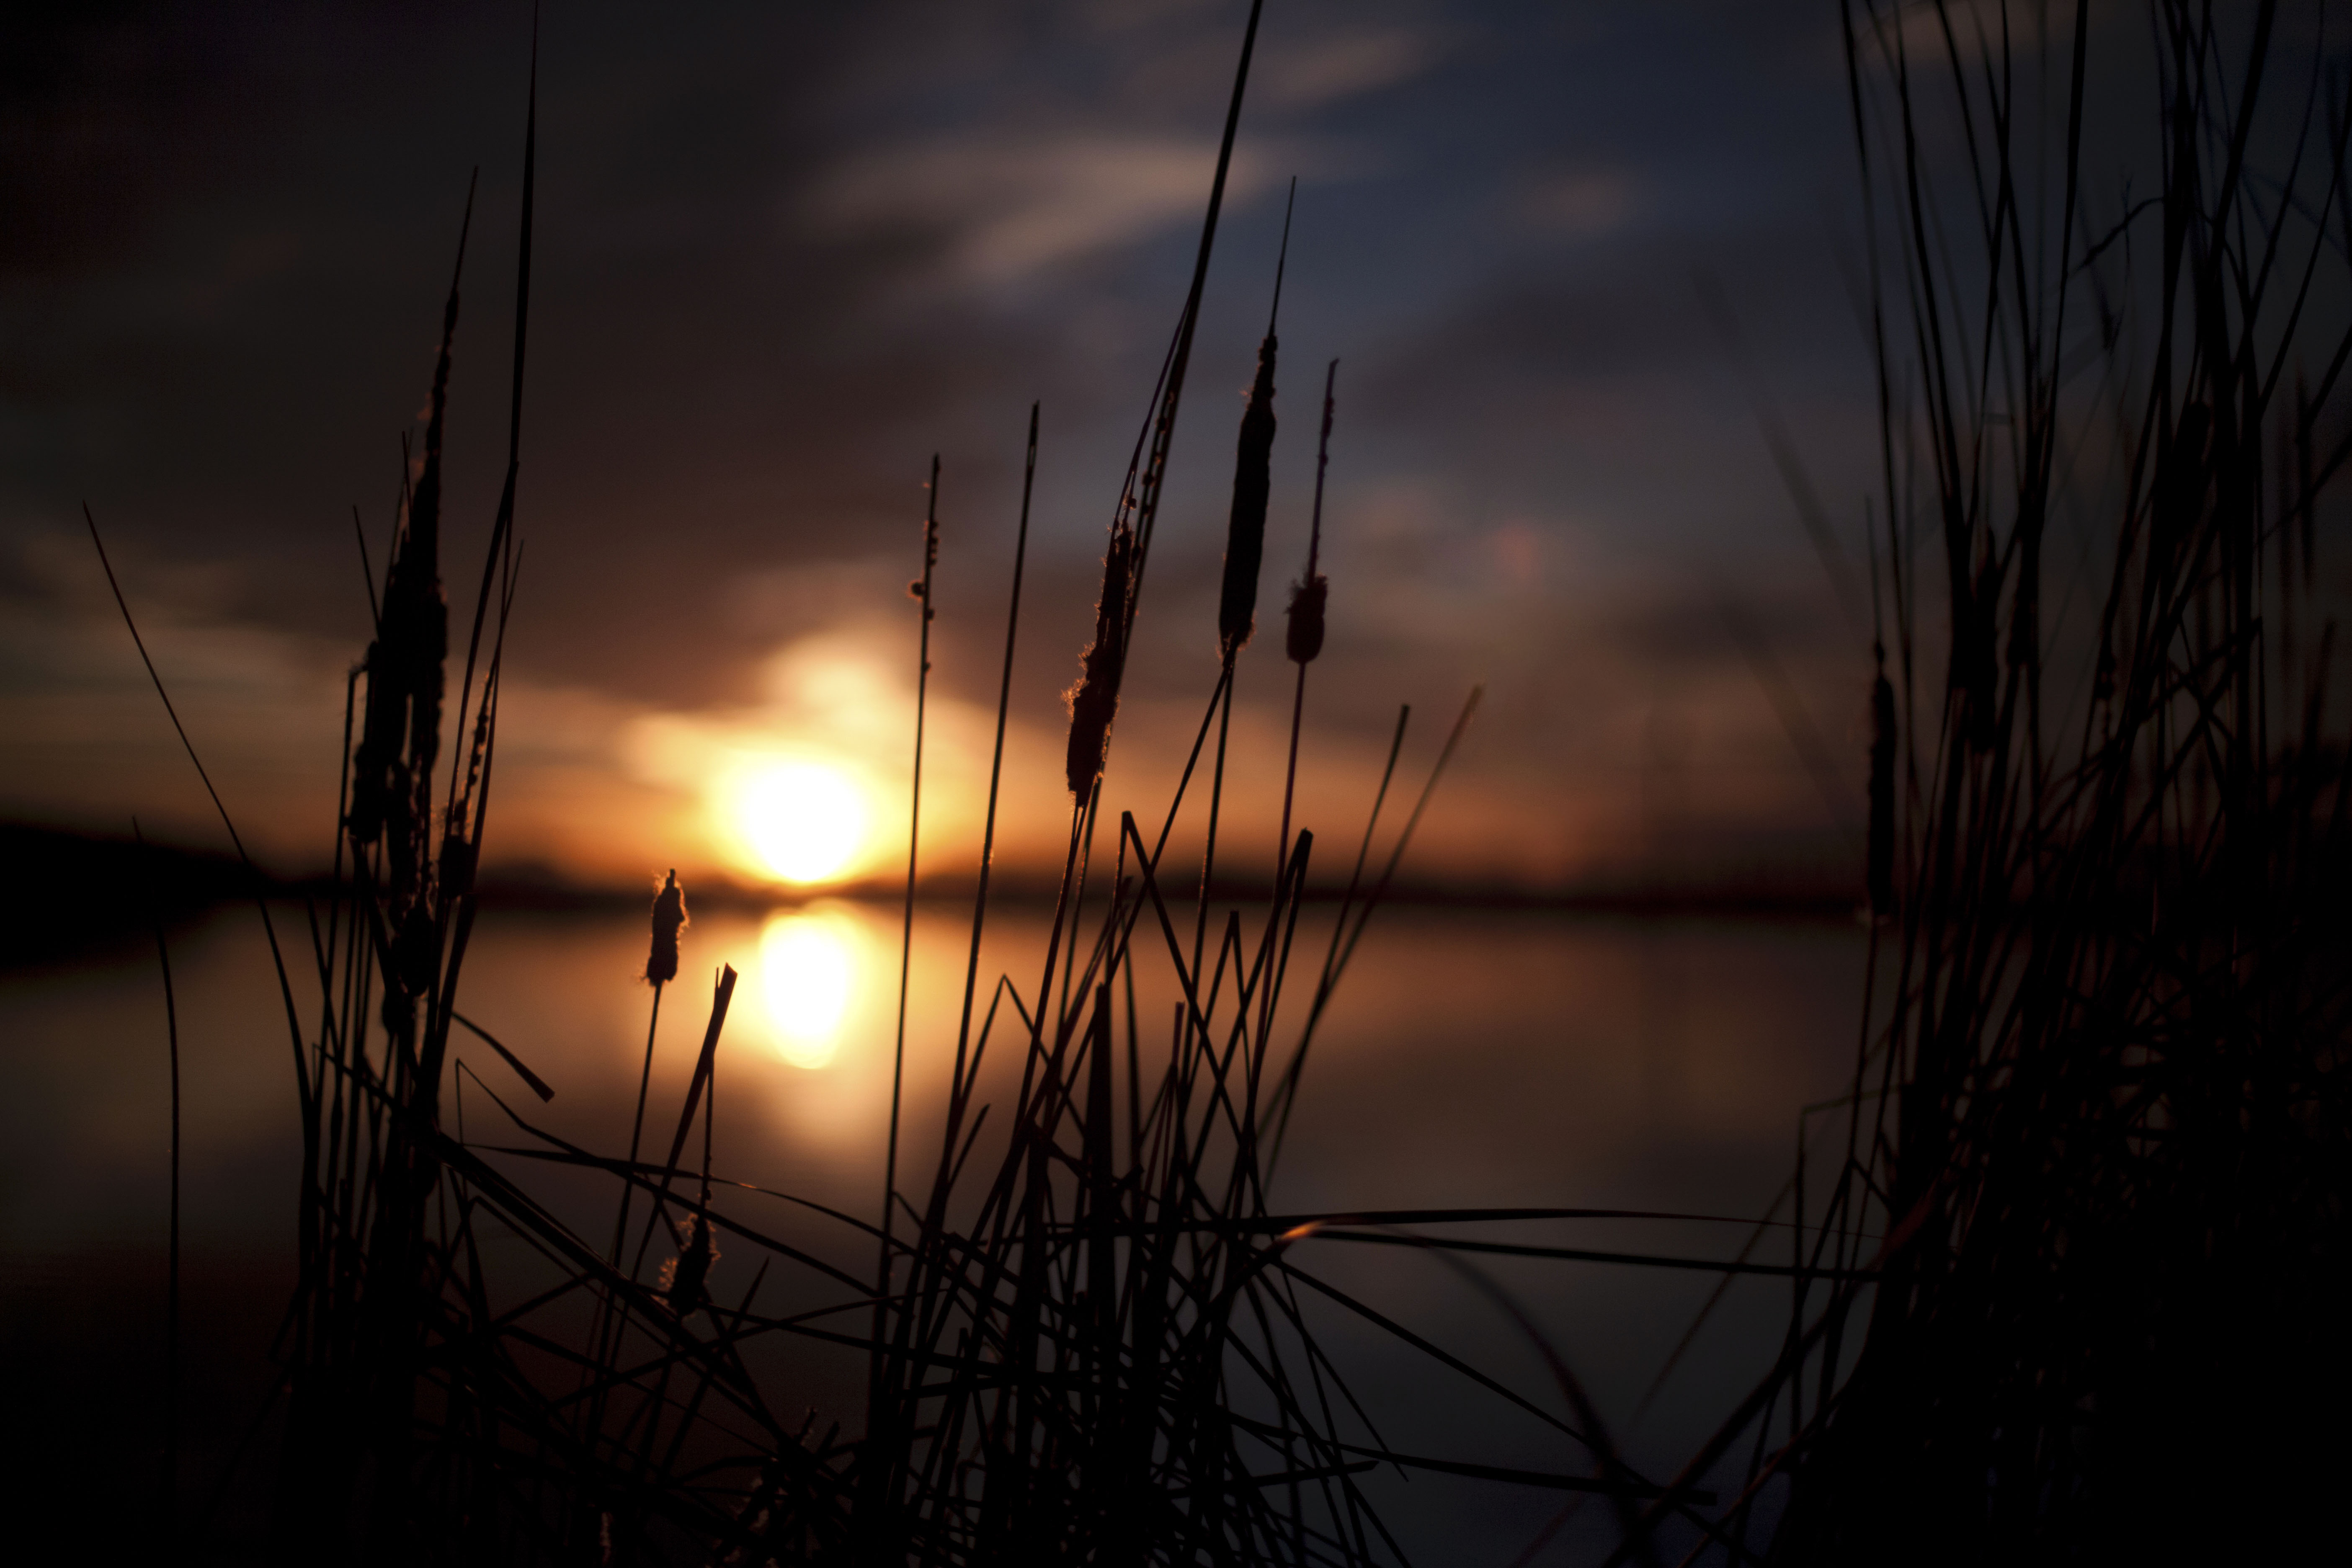 110733 download wallpaper dark, sunset, swamp, reeds screensavers and pictures for free